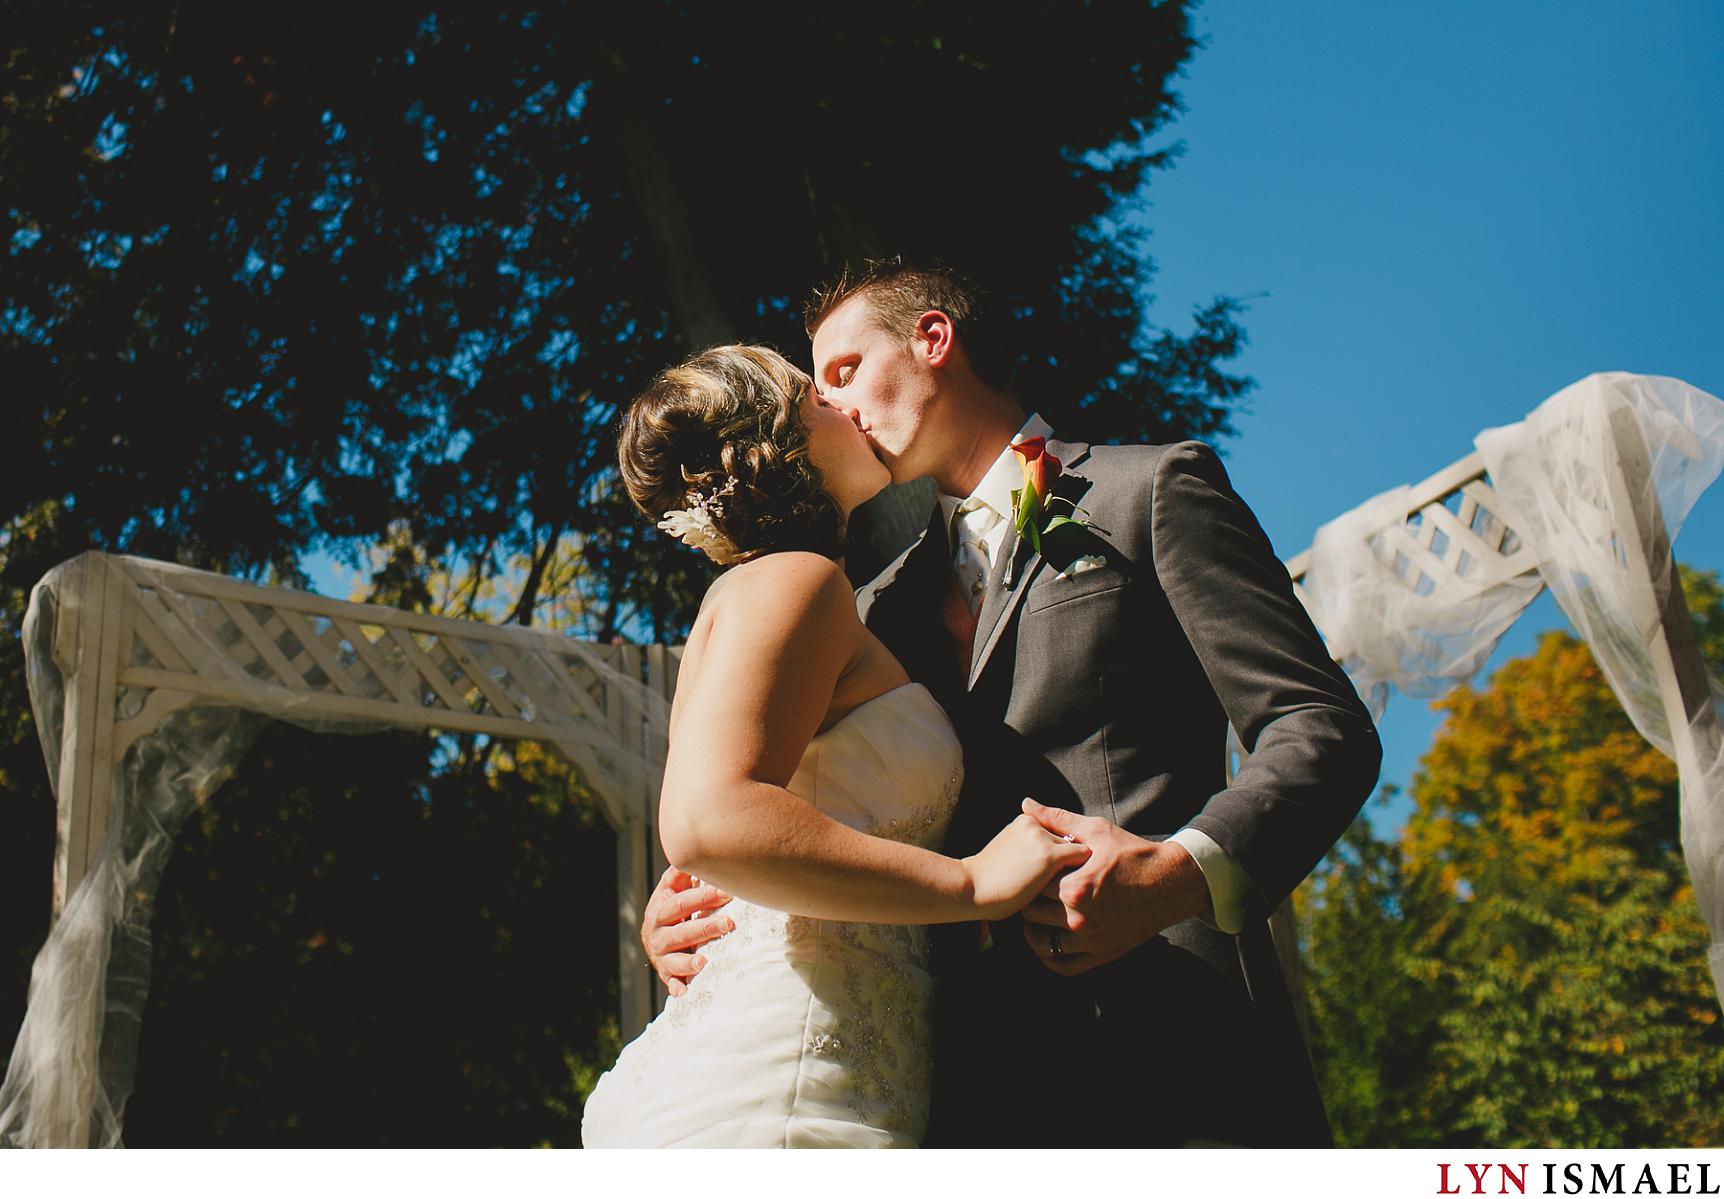 The first kiss photographed by Elora wedding photographer